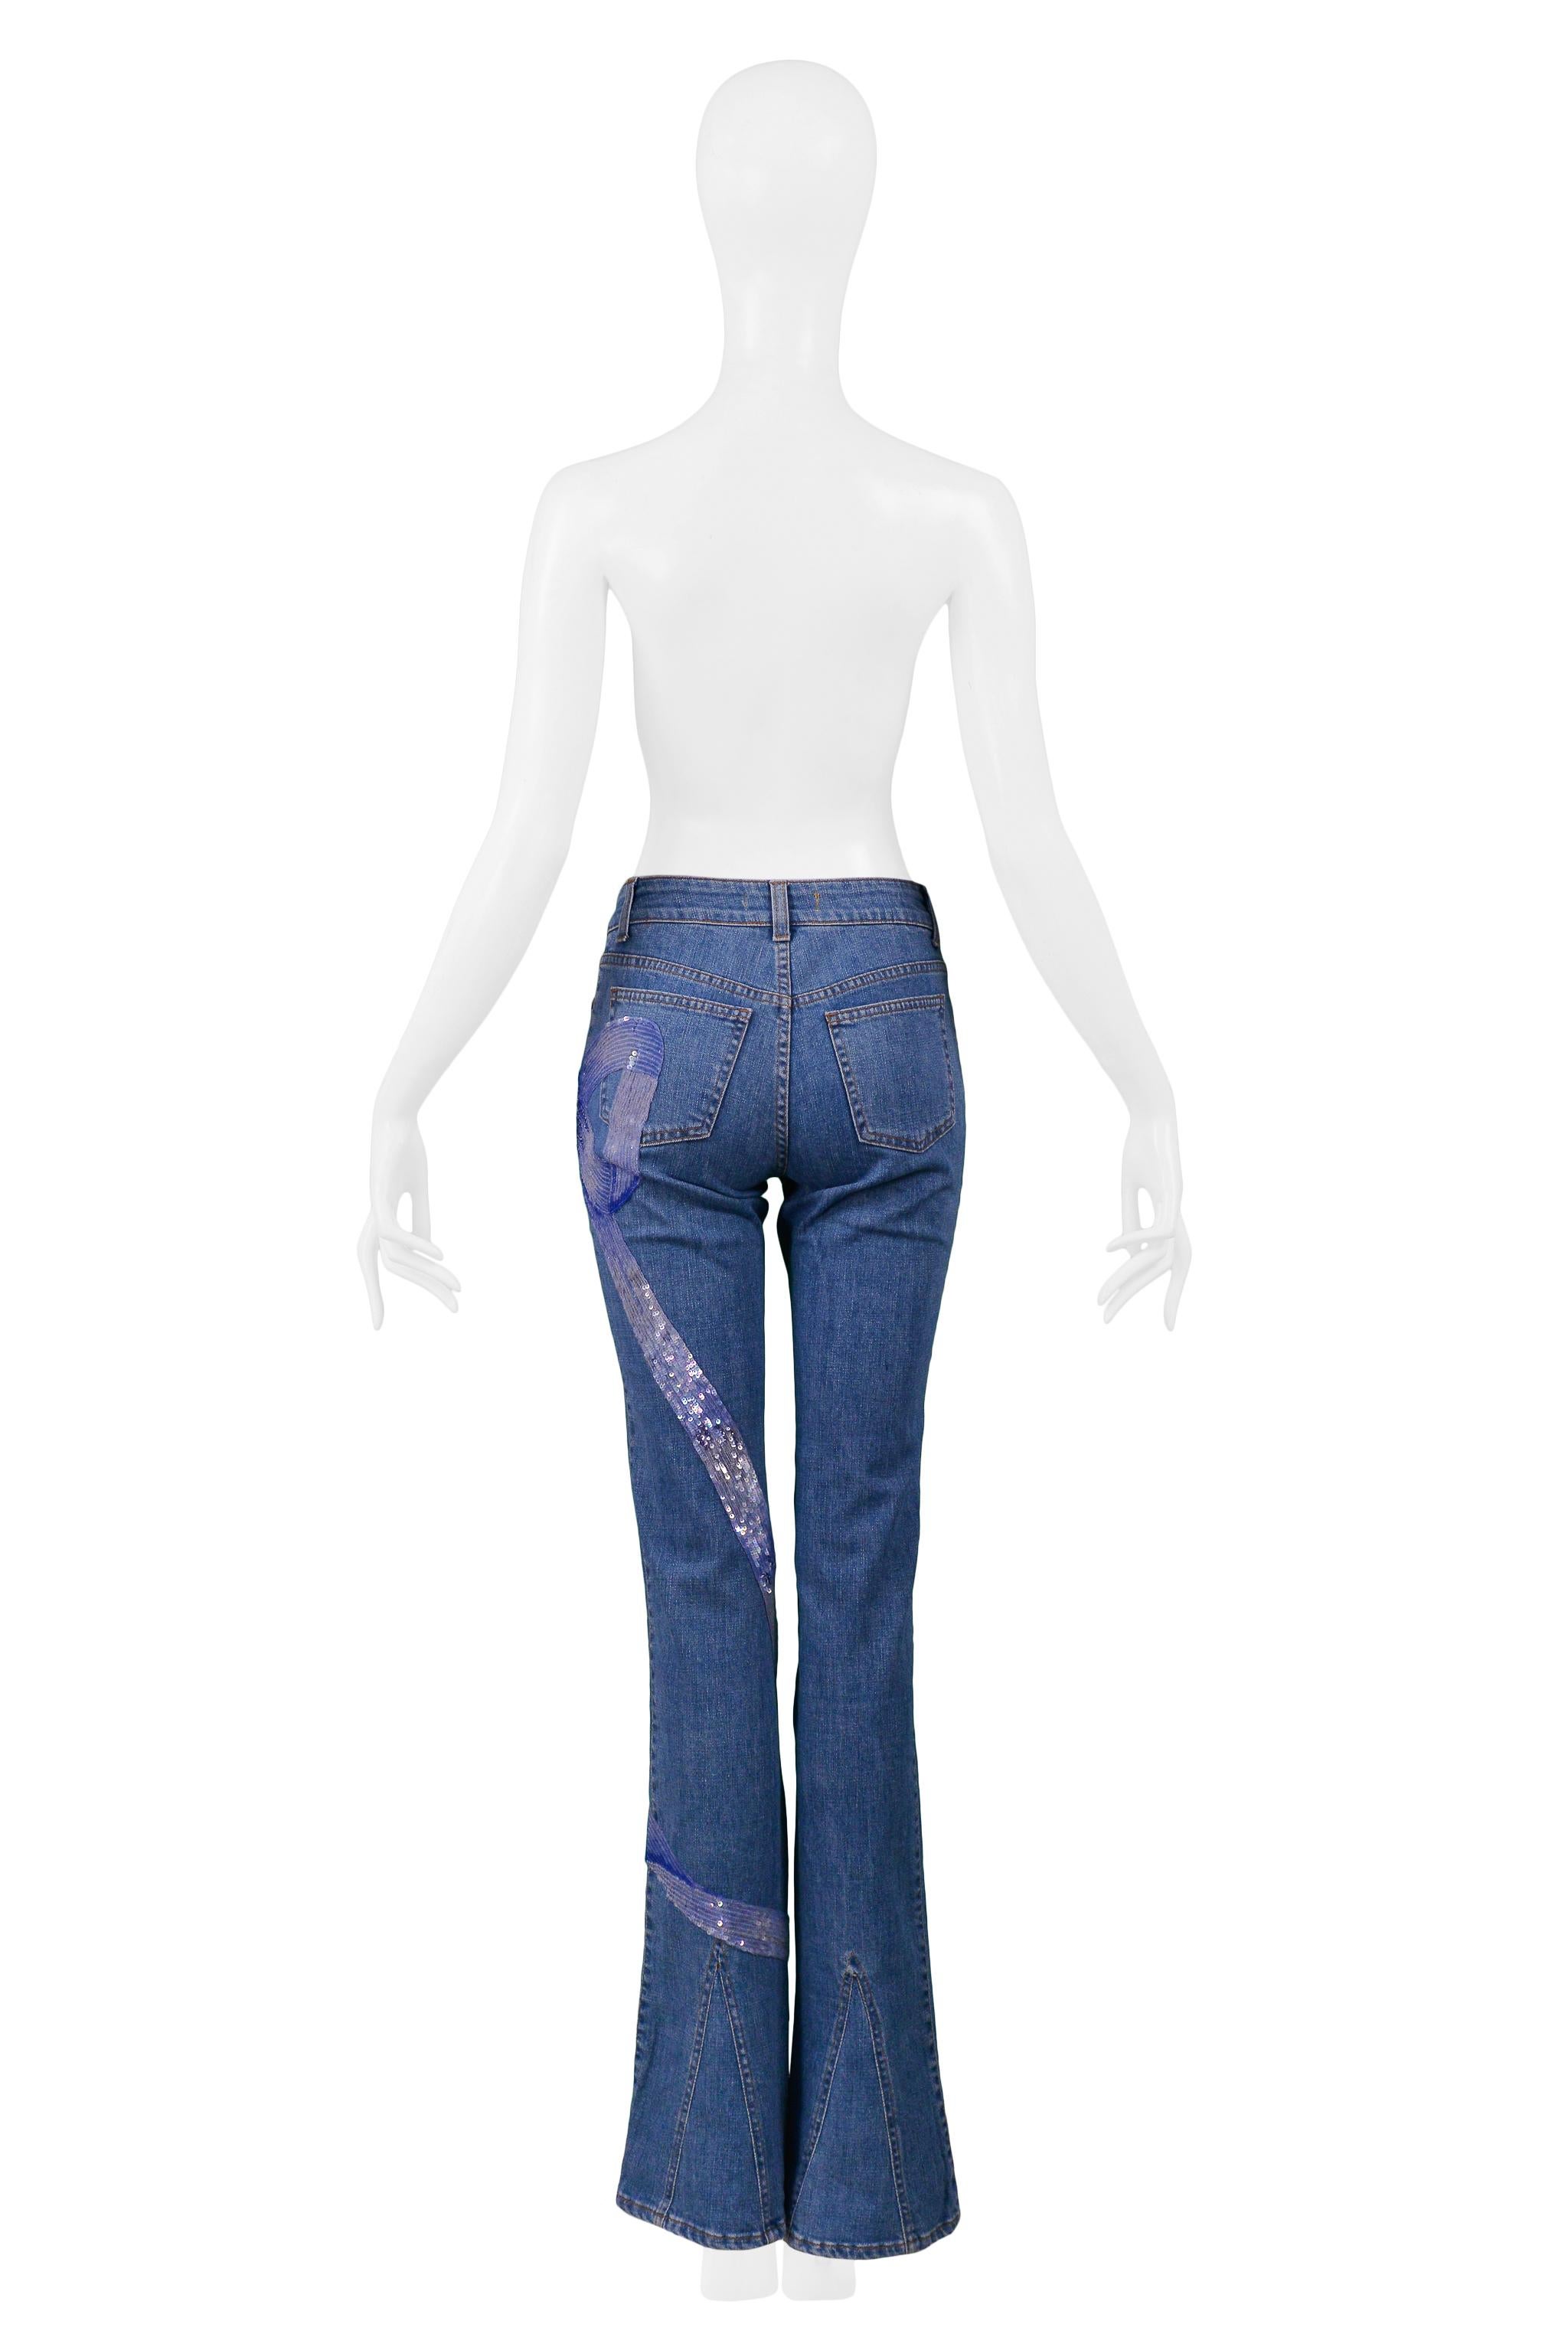 Blue Valentino Sequin Bow Print Jeans 2006 For Sale